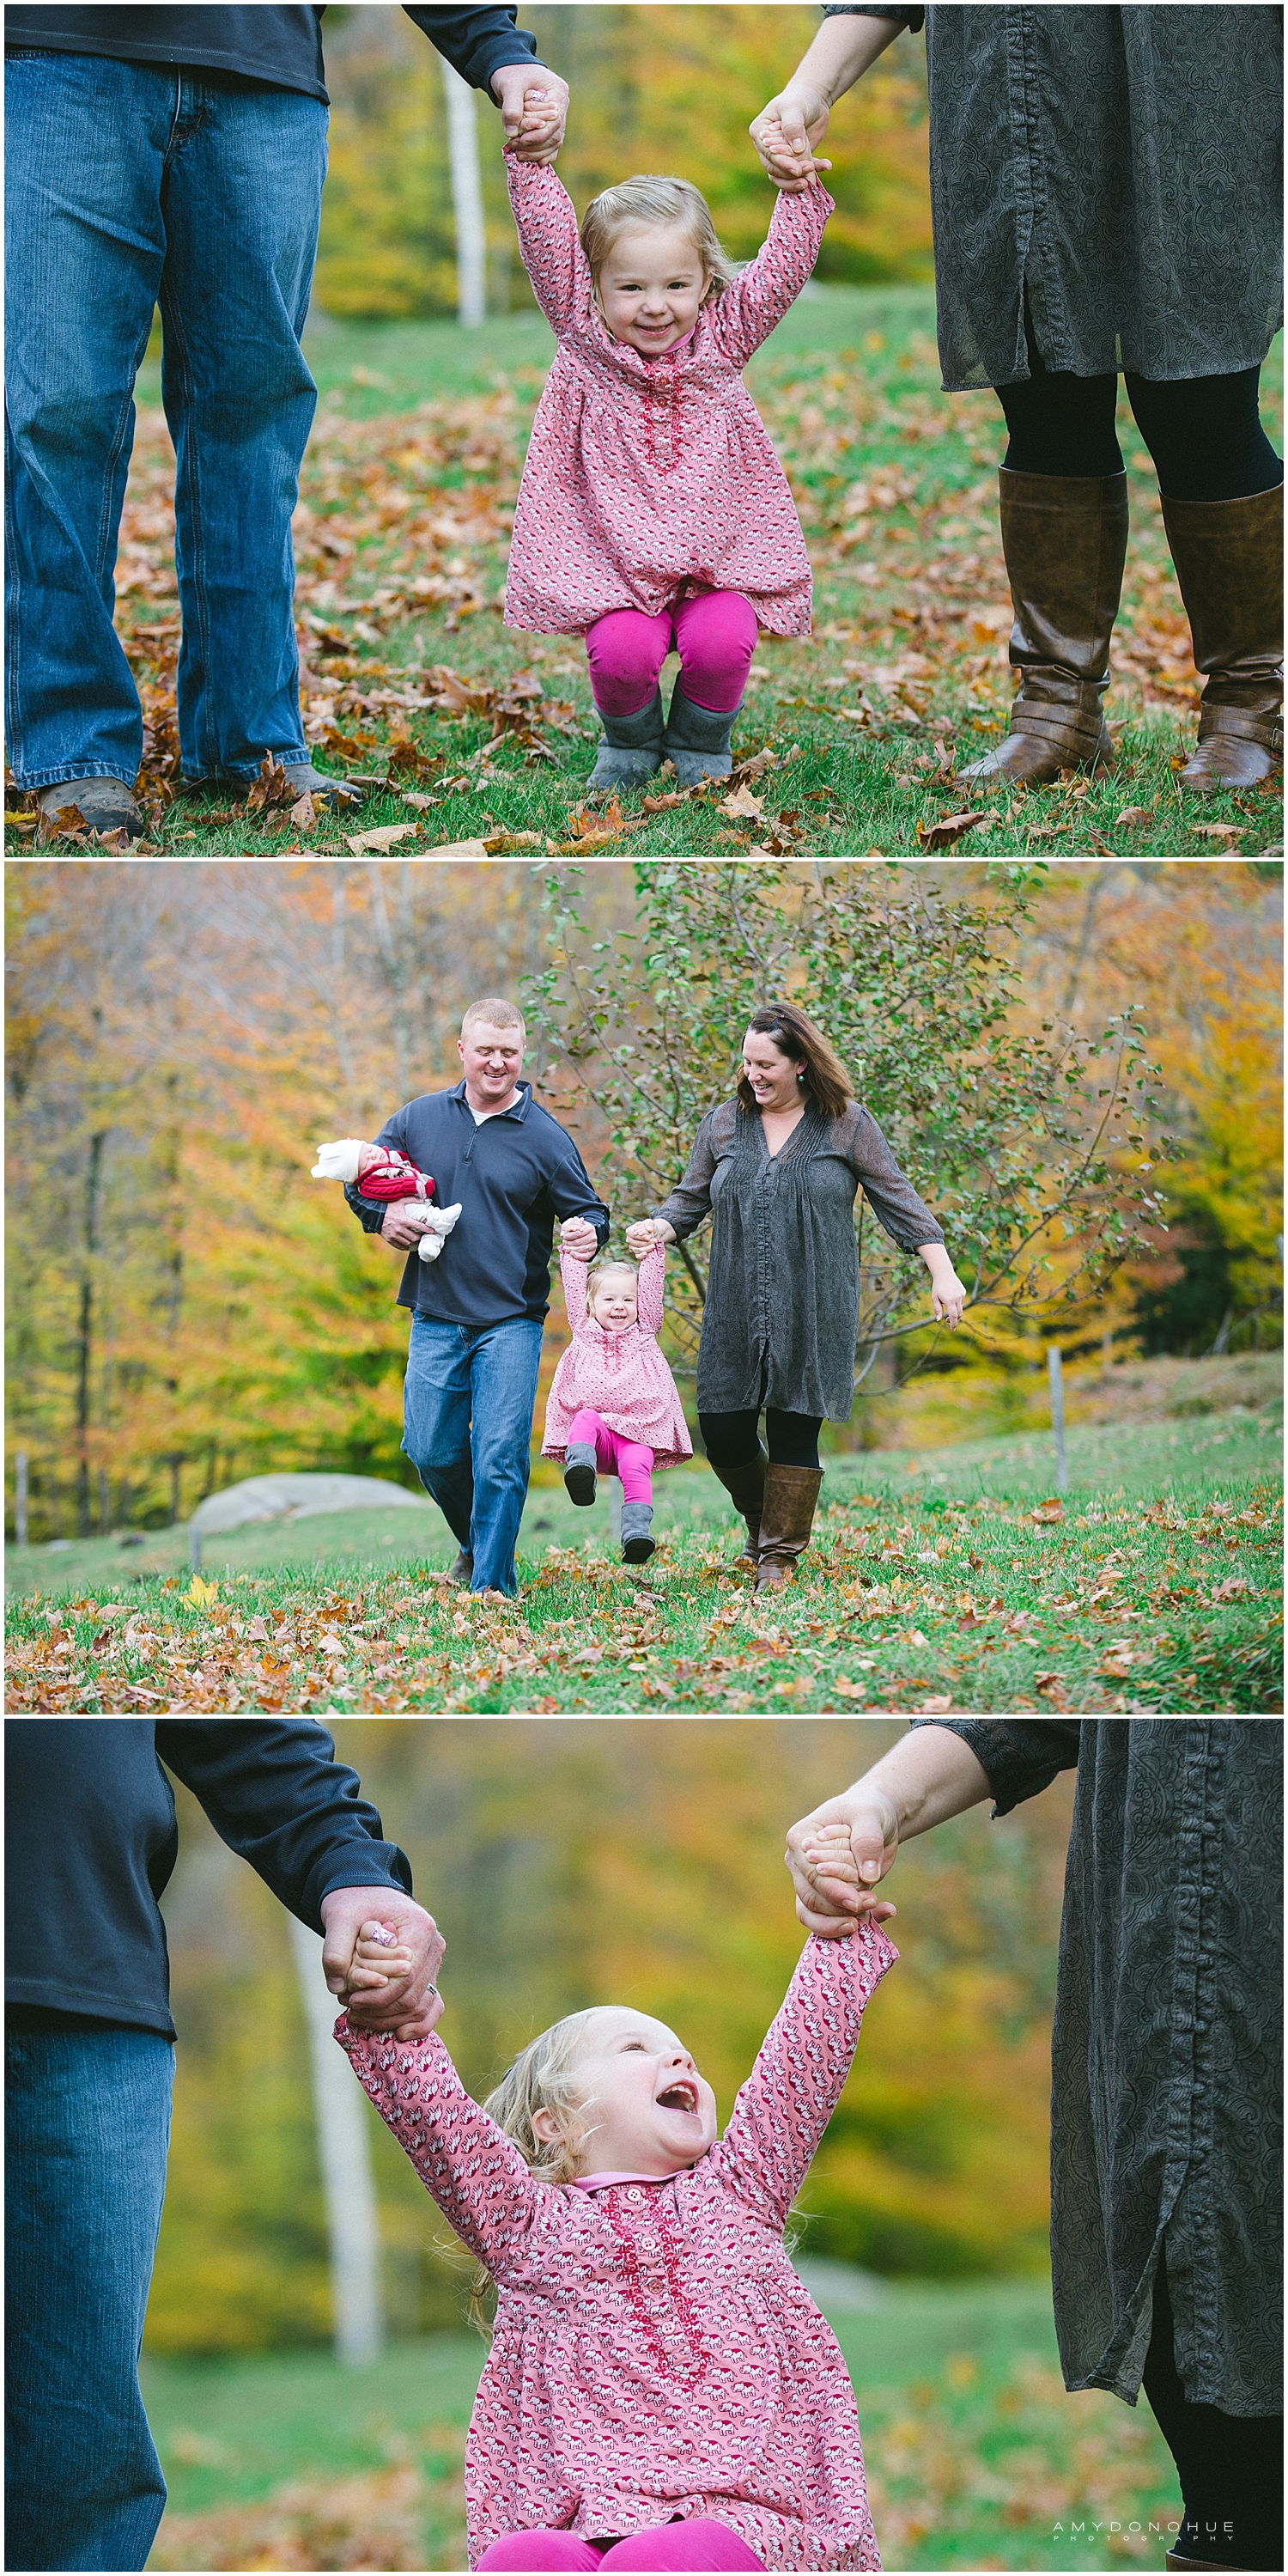 Vermont Family Photographer | © Amy Donohue Photography